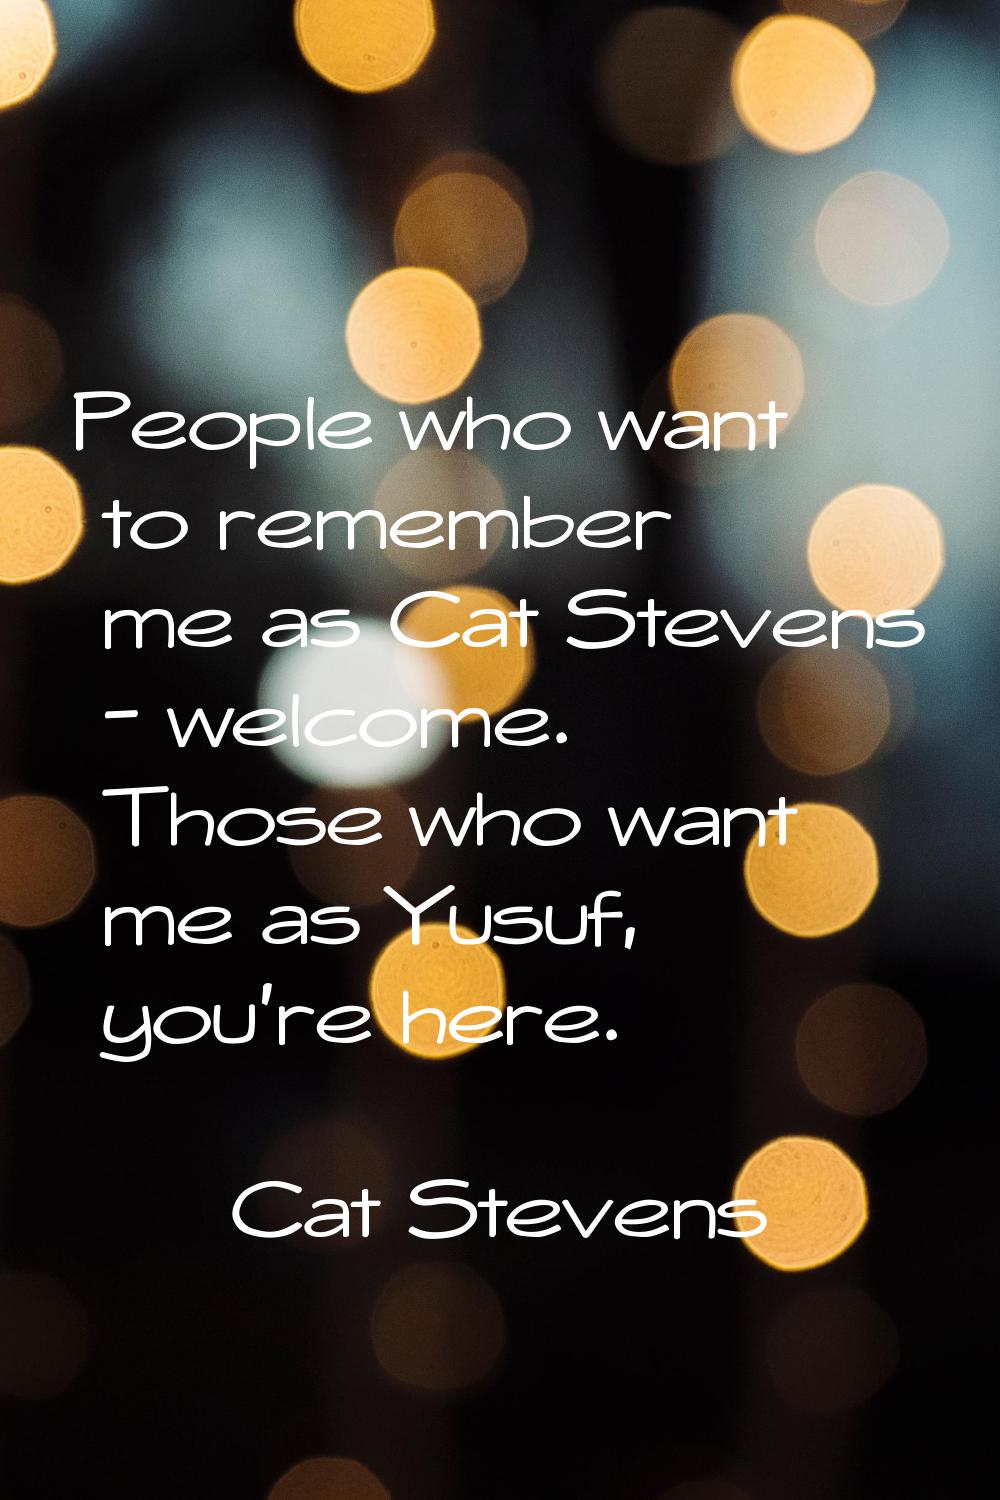 People who want to remember me as Cat Stevens - welcome. Those who want me as Yusuf, you're here.